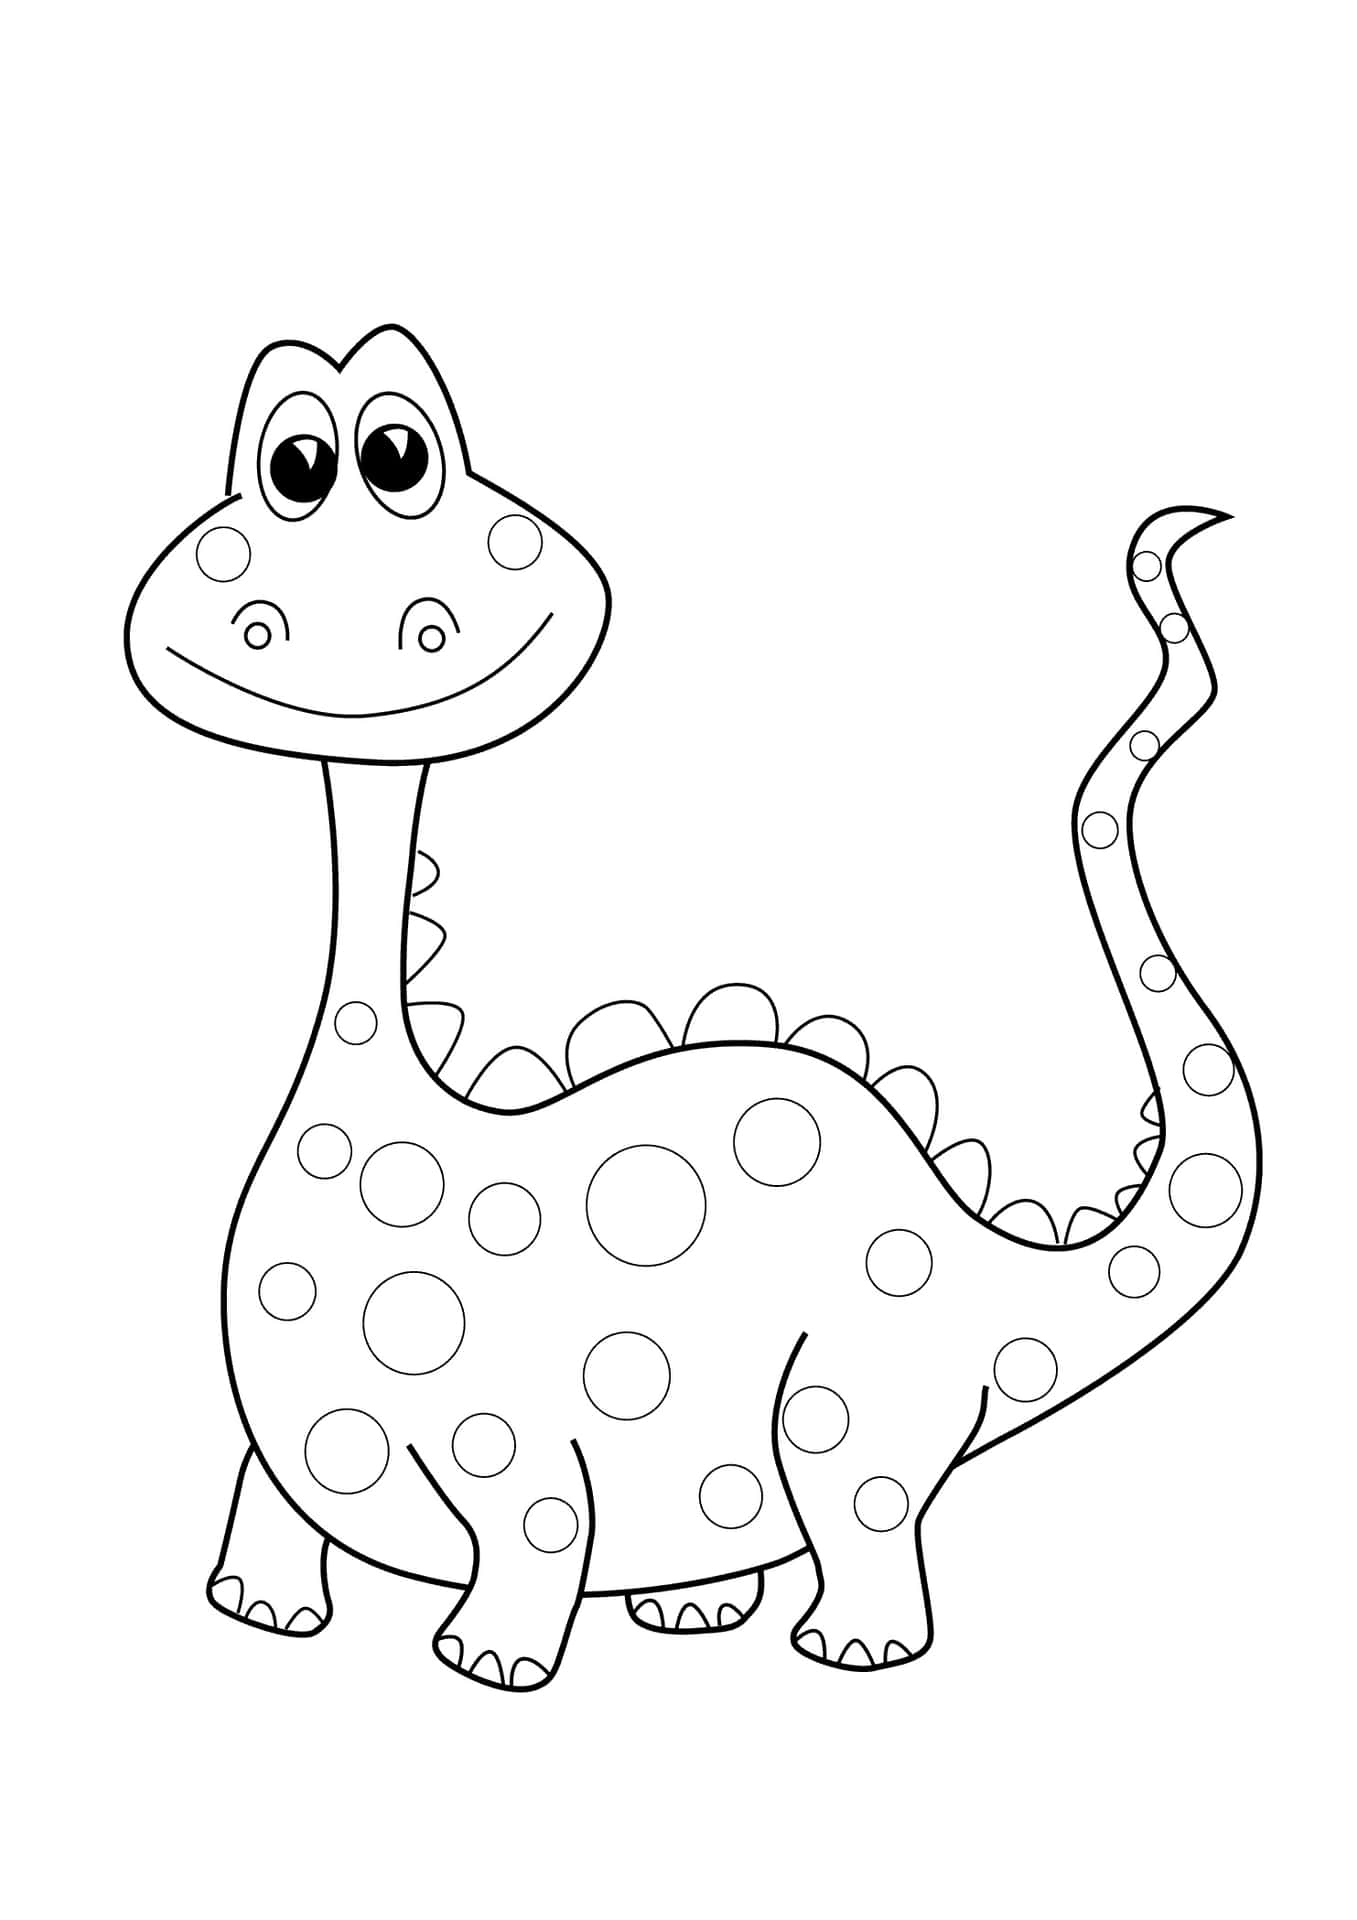 Coloring Dinosaurs for Kids